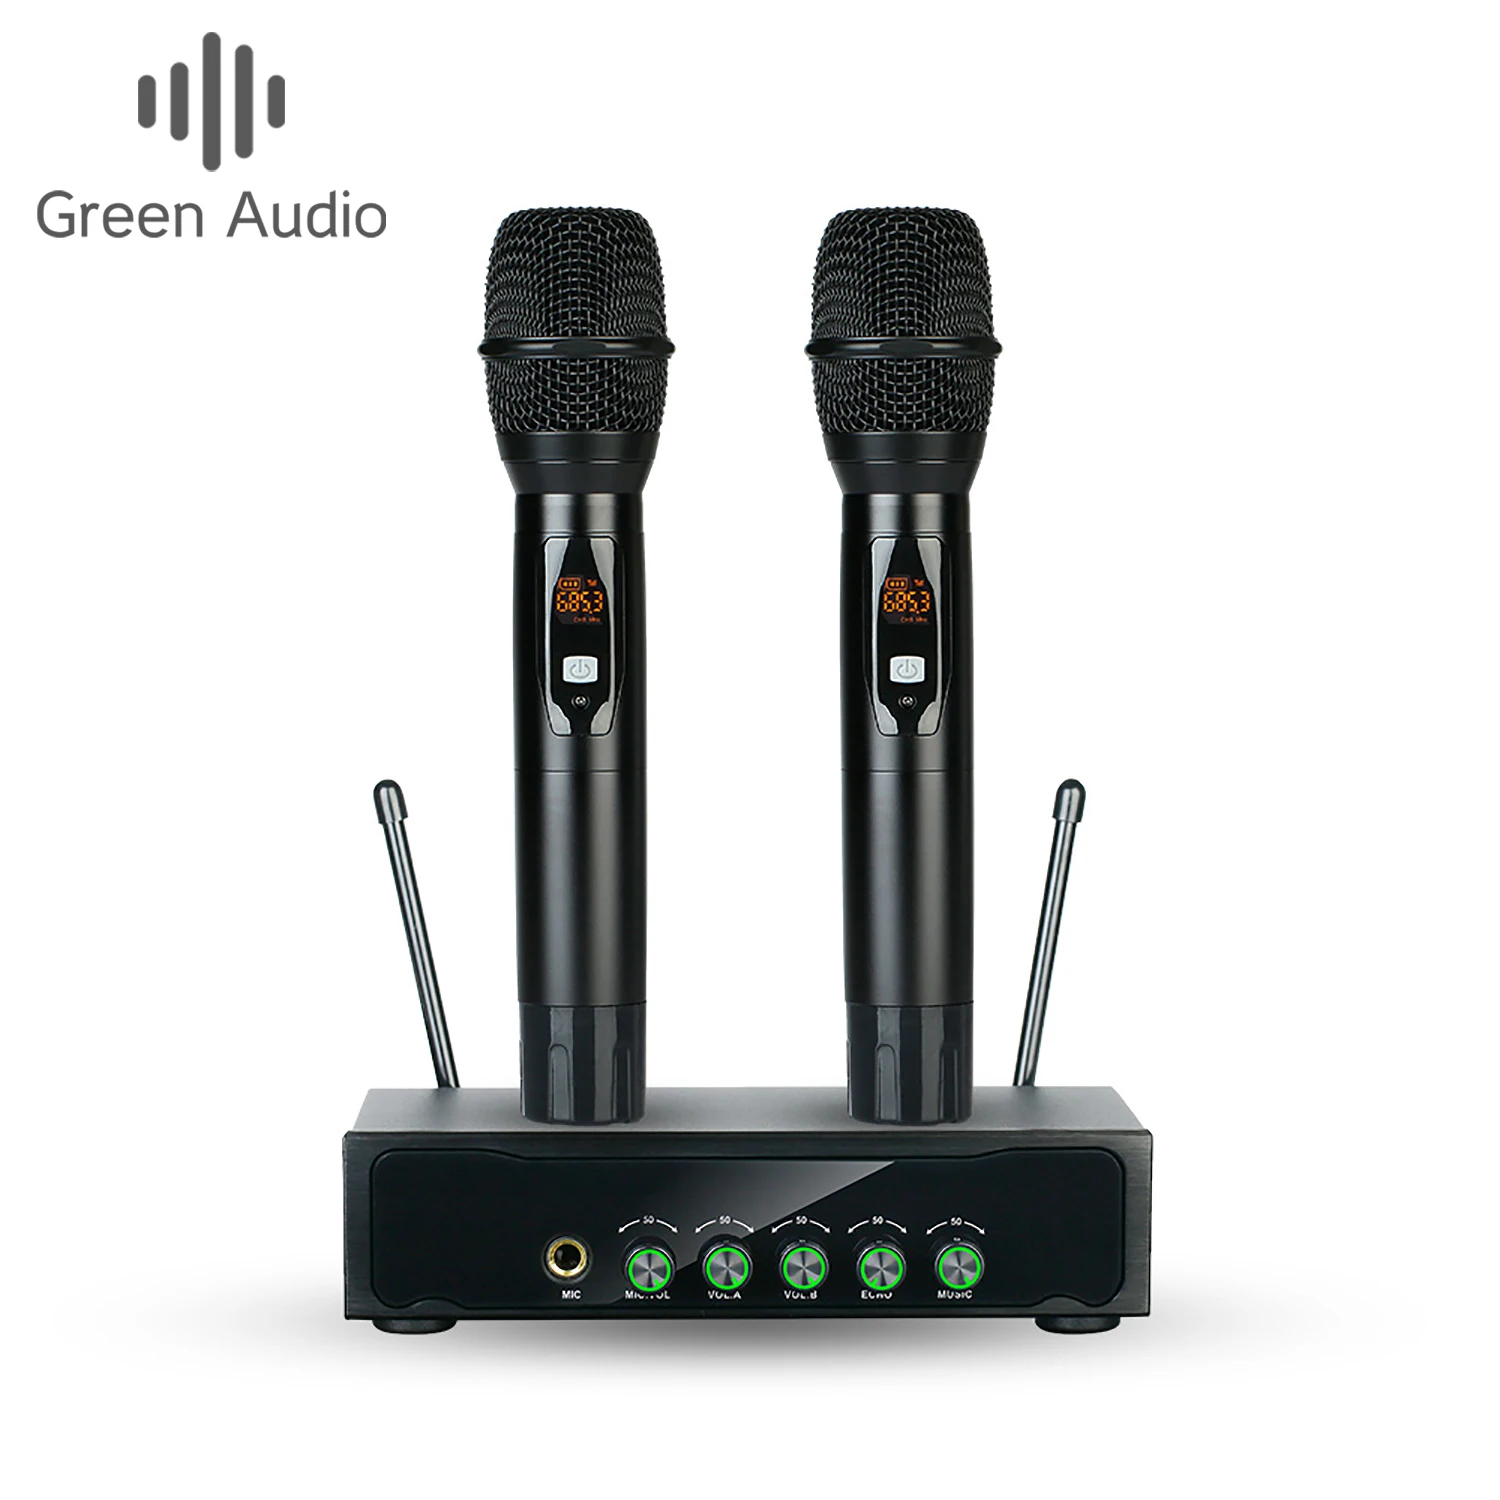 

GAW-KD200 Professional UHF Karaoke Wireless Microphone With Echo Music Volume Adjustment For Stage Performance